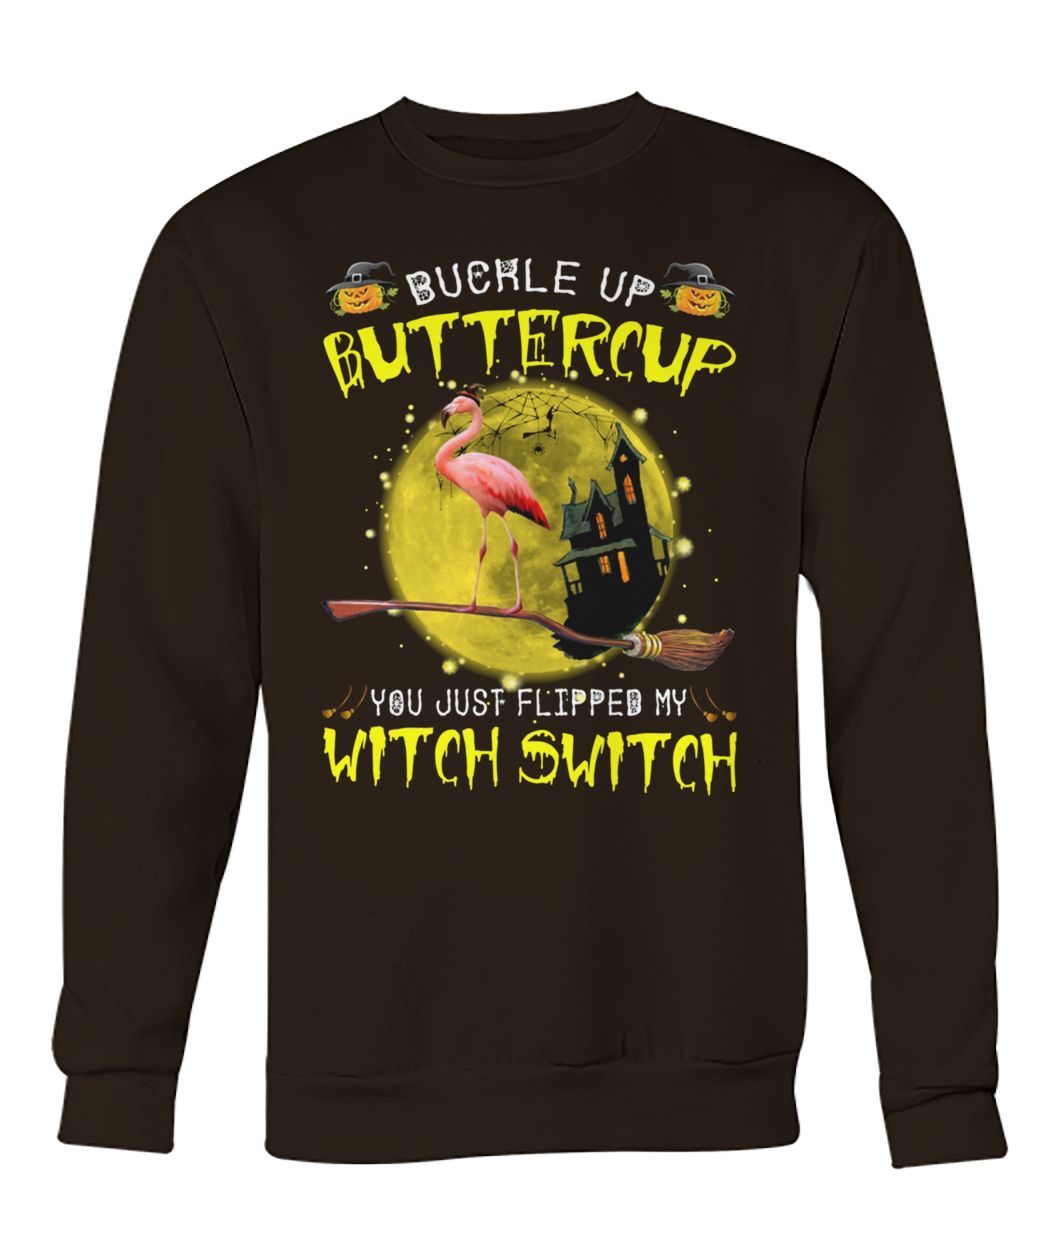 Buckle up buttercup you just flipped my witch switch flamingo crew neck sweatshirt